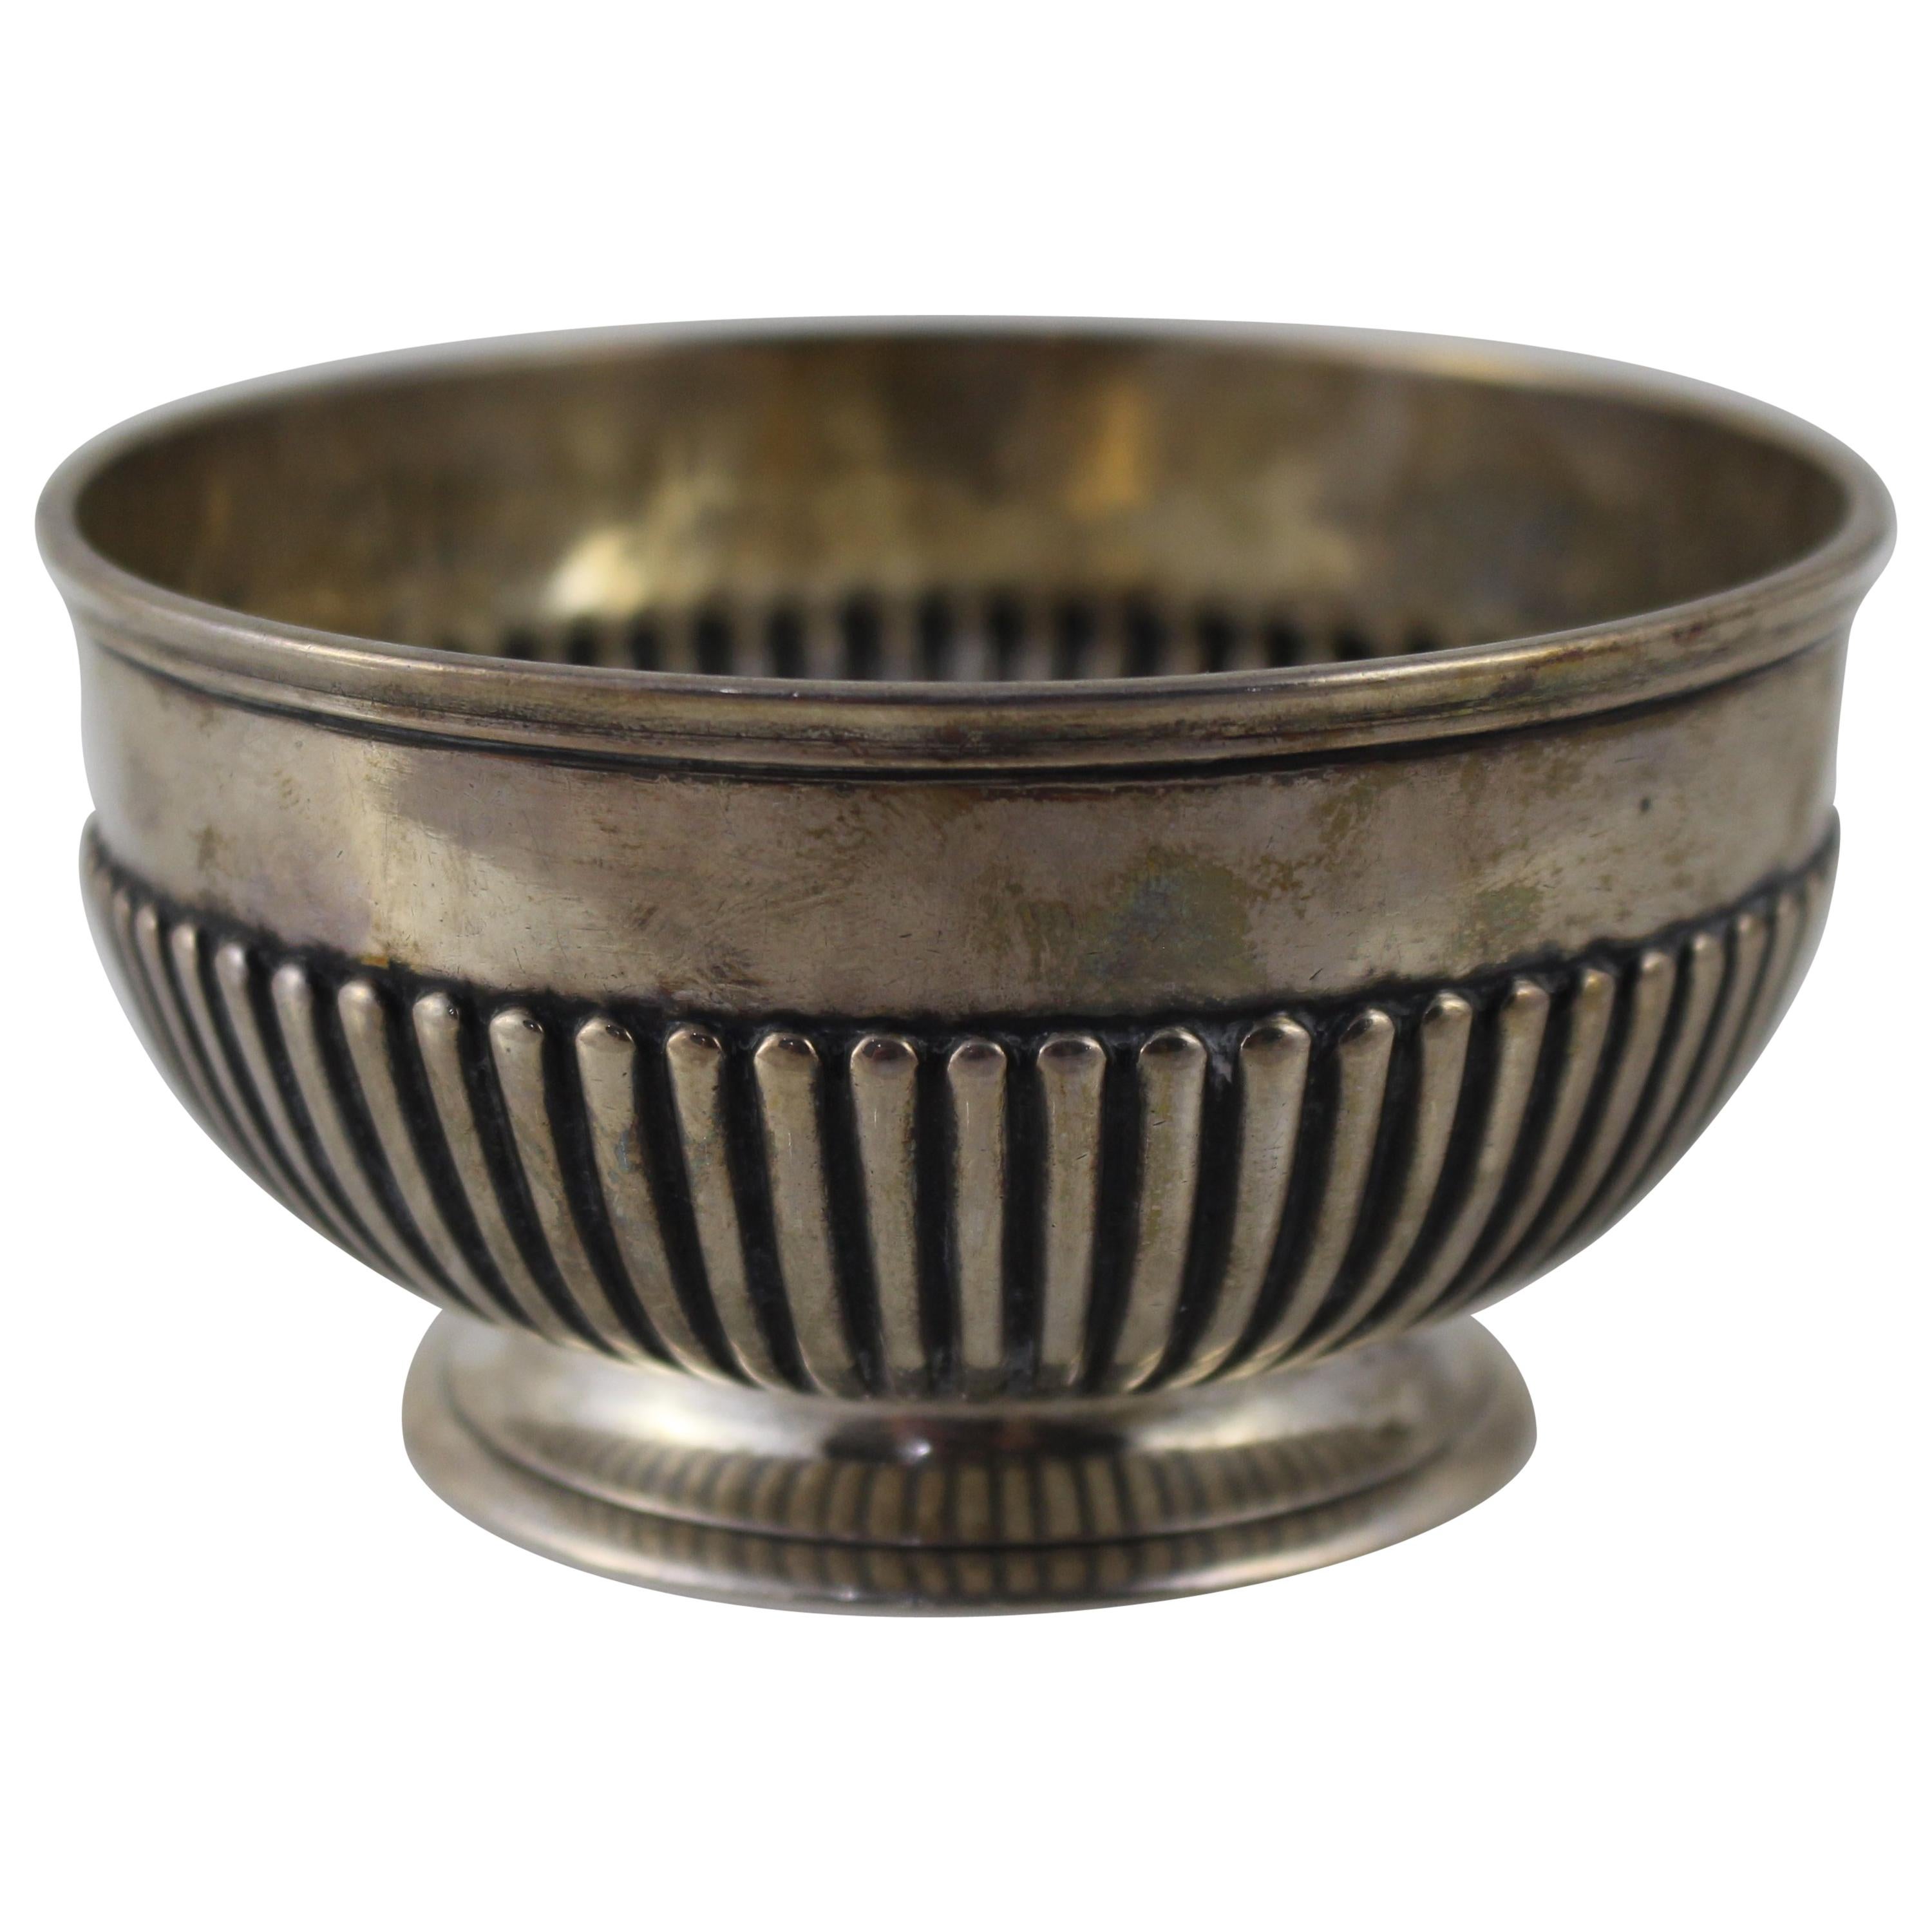 Victorian Sterling Silver Bowl Dobson Piccadilly, London, 1877